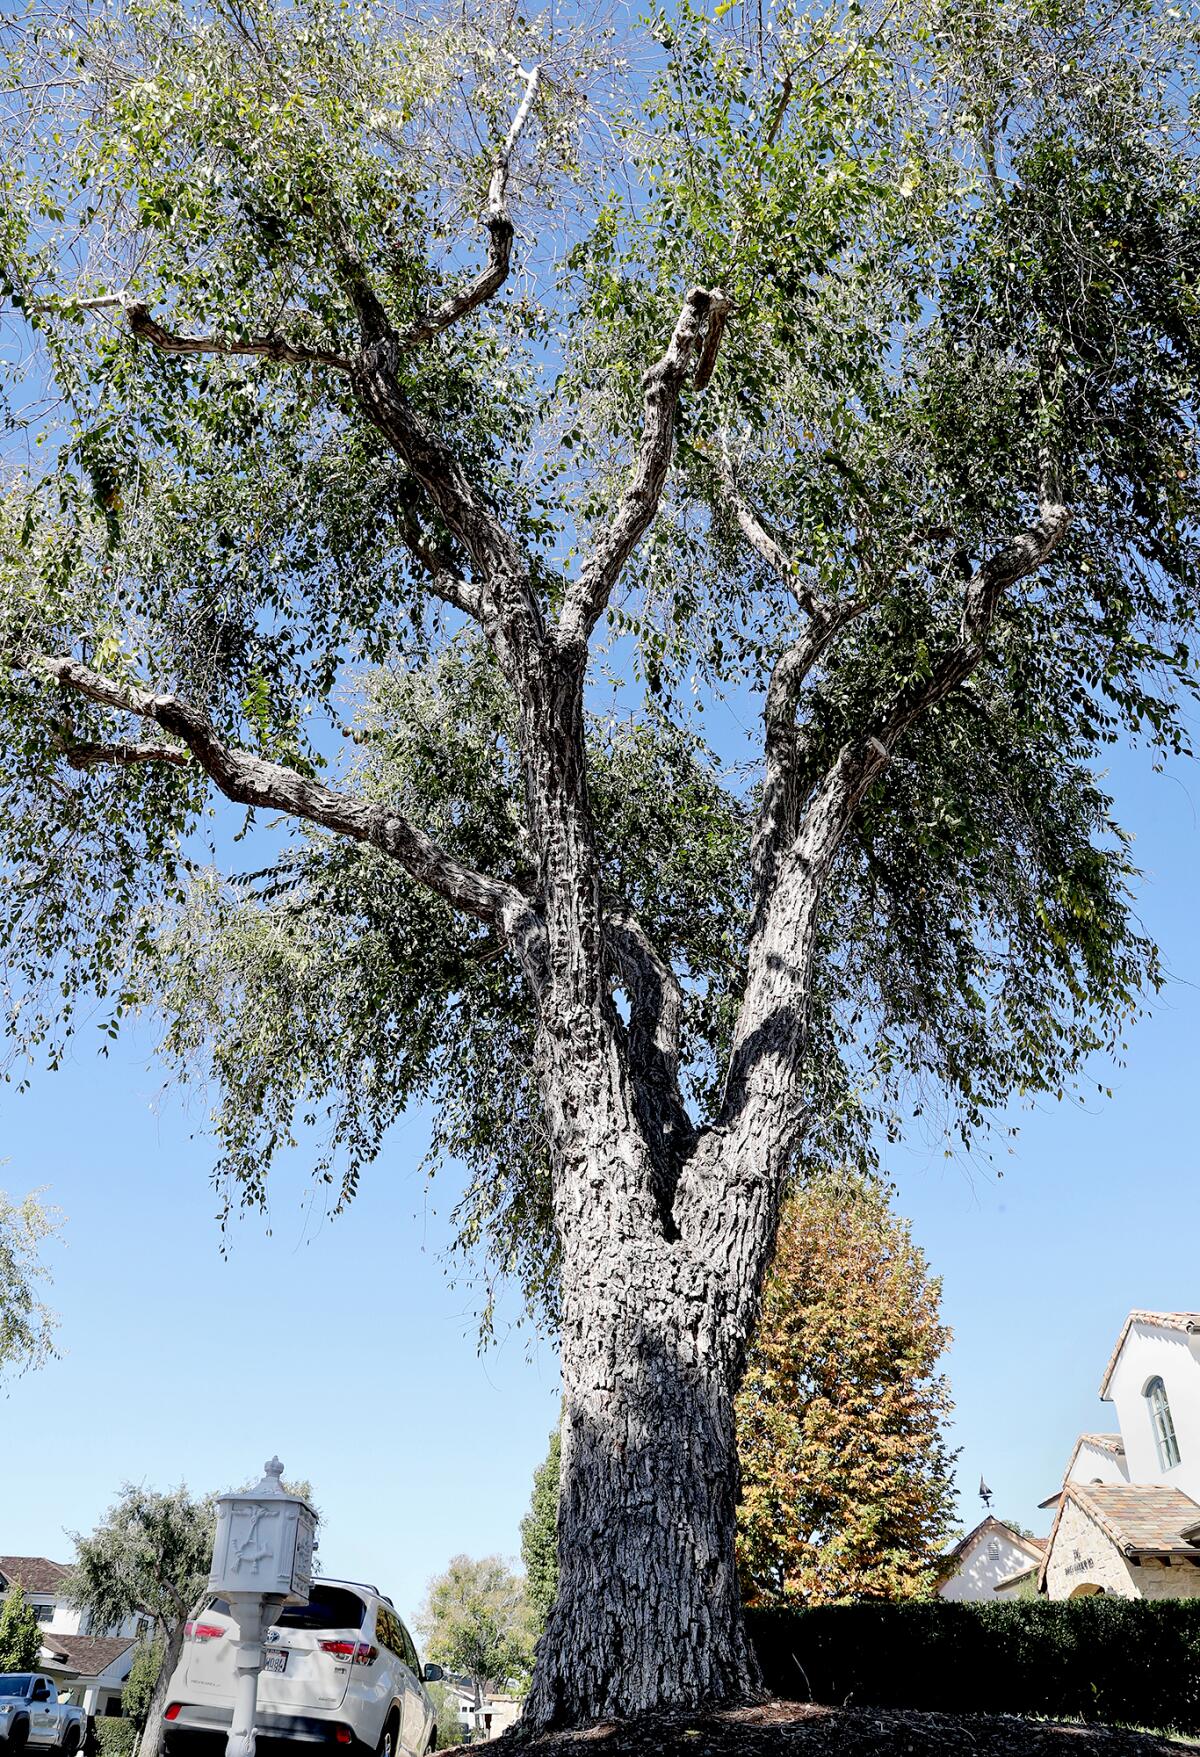 The Parks, Beaches and Recreation Committee voted 5-1 to save this 70-year-old Siberian elm tree along Snug Harbor Road.